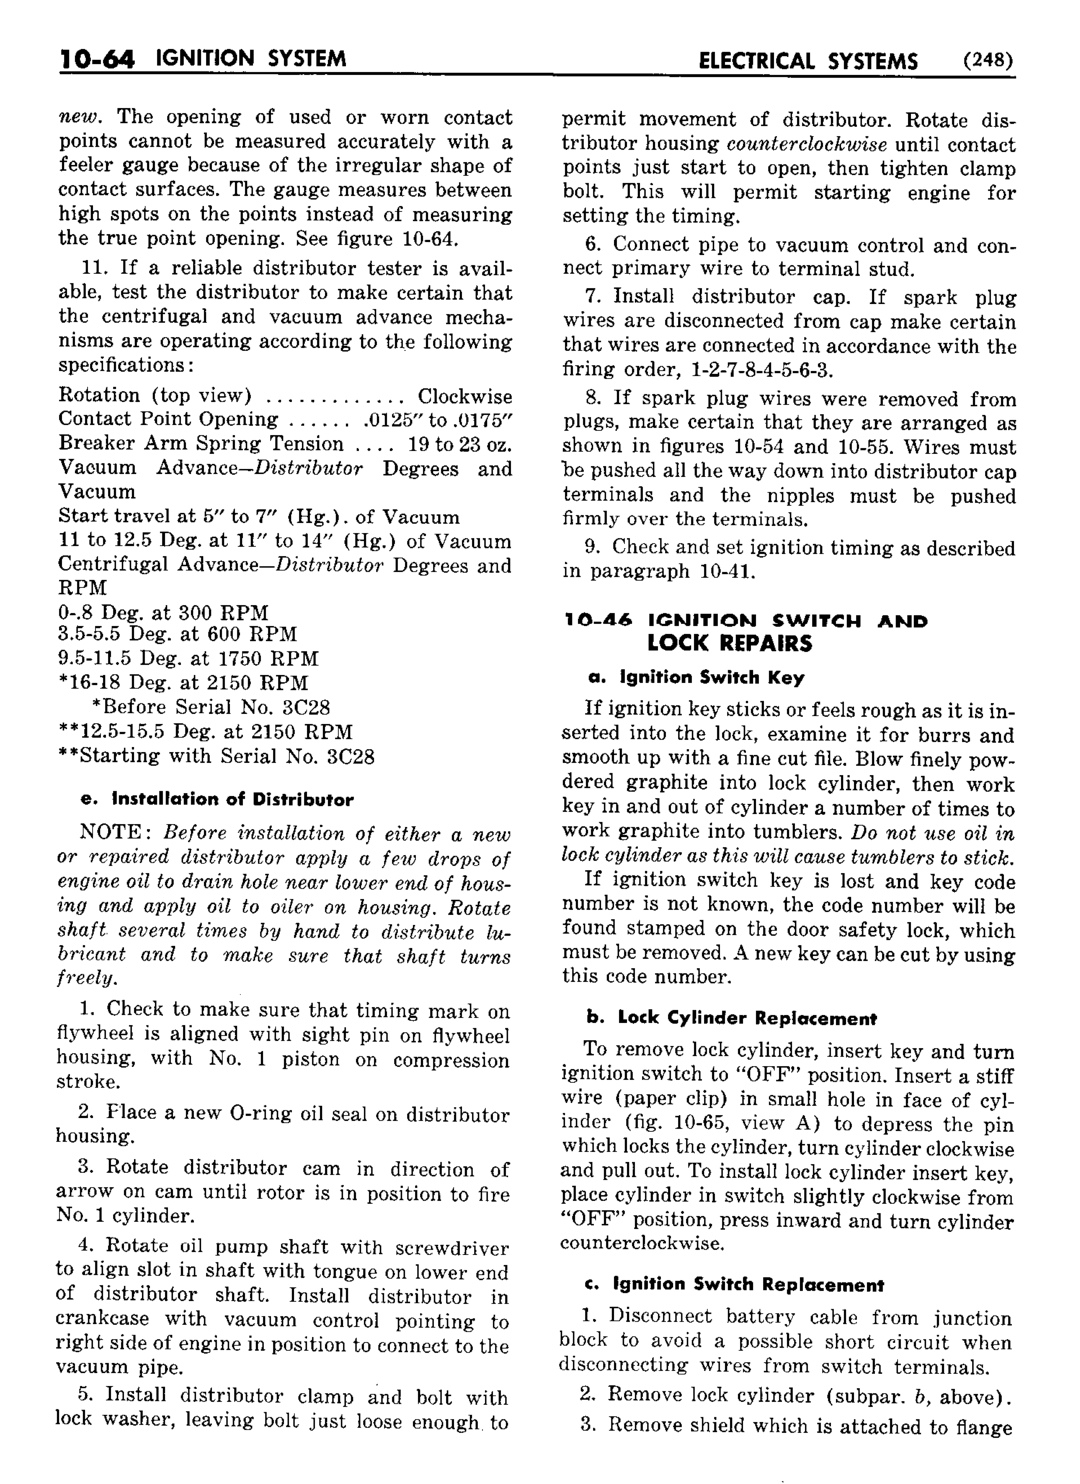 n_11 1953 Buick Shop Manual - Electrical Systems-064-064.jpg